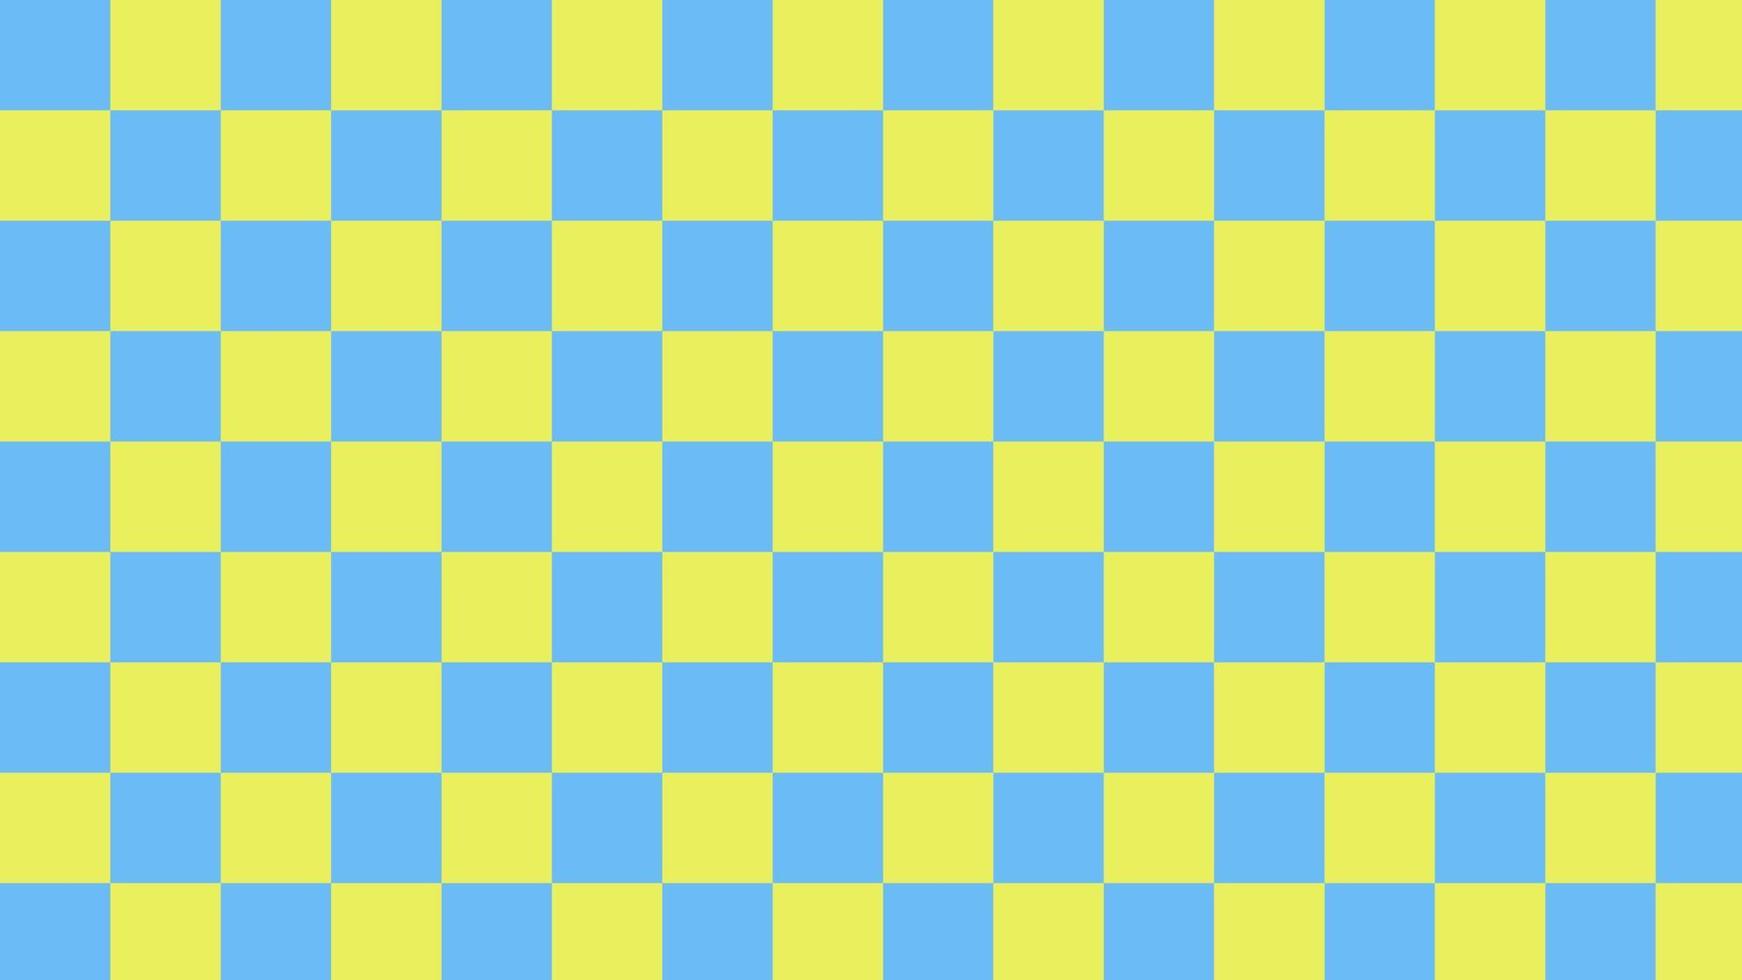 cute blue and yellow checkers, gingham, plaid, checkerboard pattern aesthetic wallpaper illustration, perfect for wallpaper, backdrop, postcard, background for your design